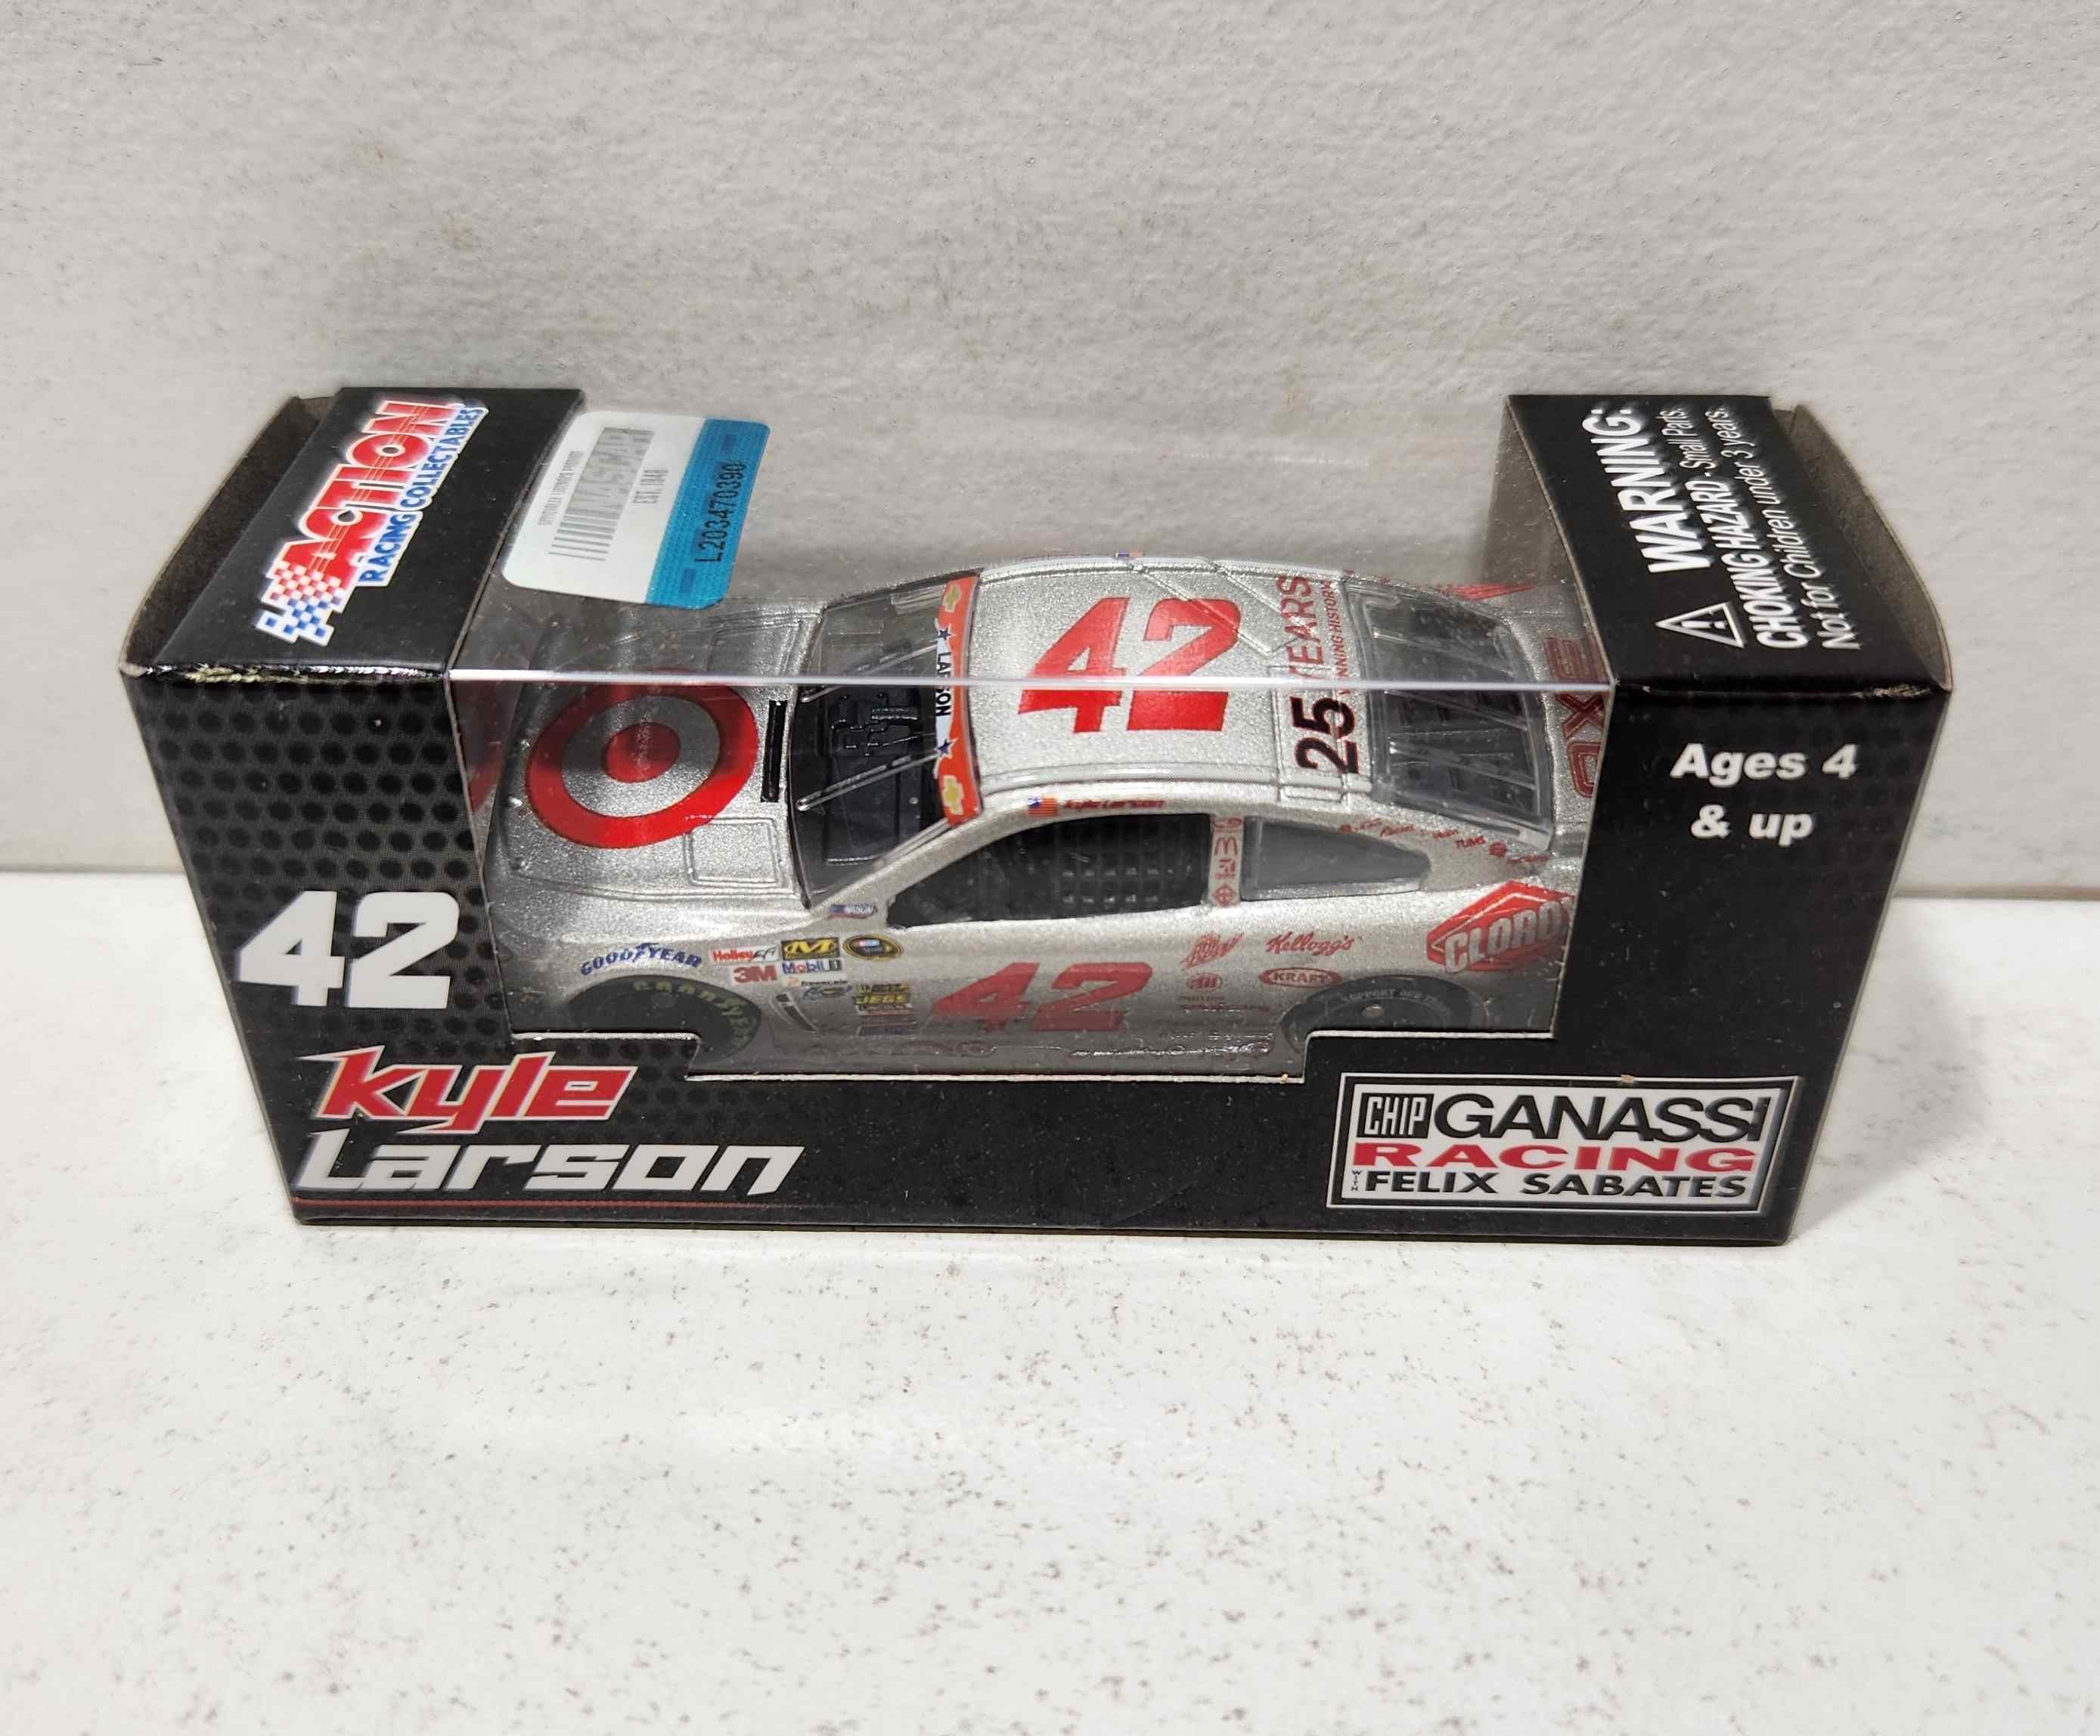 2014 Kyle Target 1/64th Target "Silver" Pitstop Series Chevrolet SS